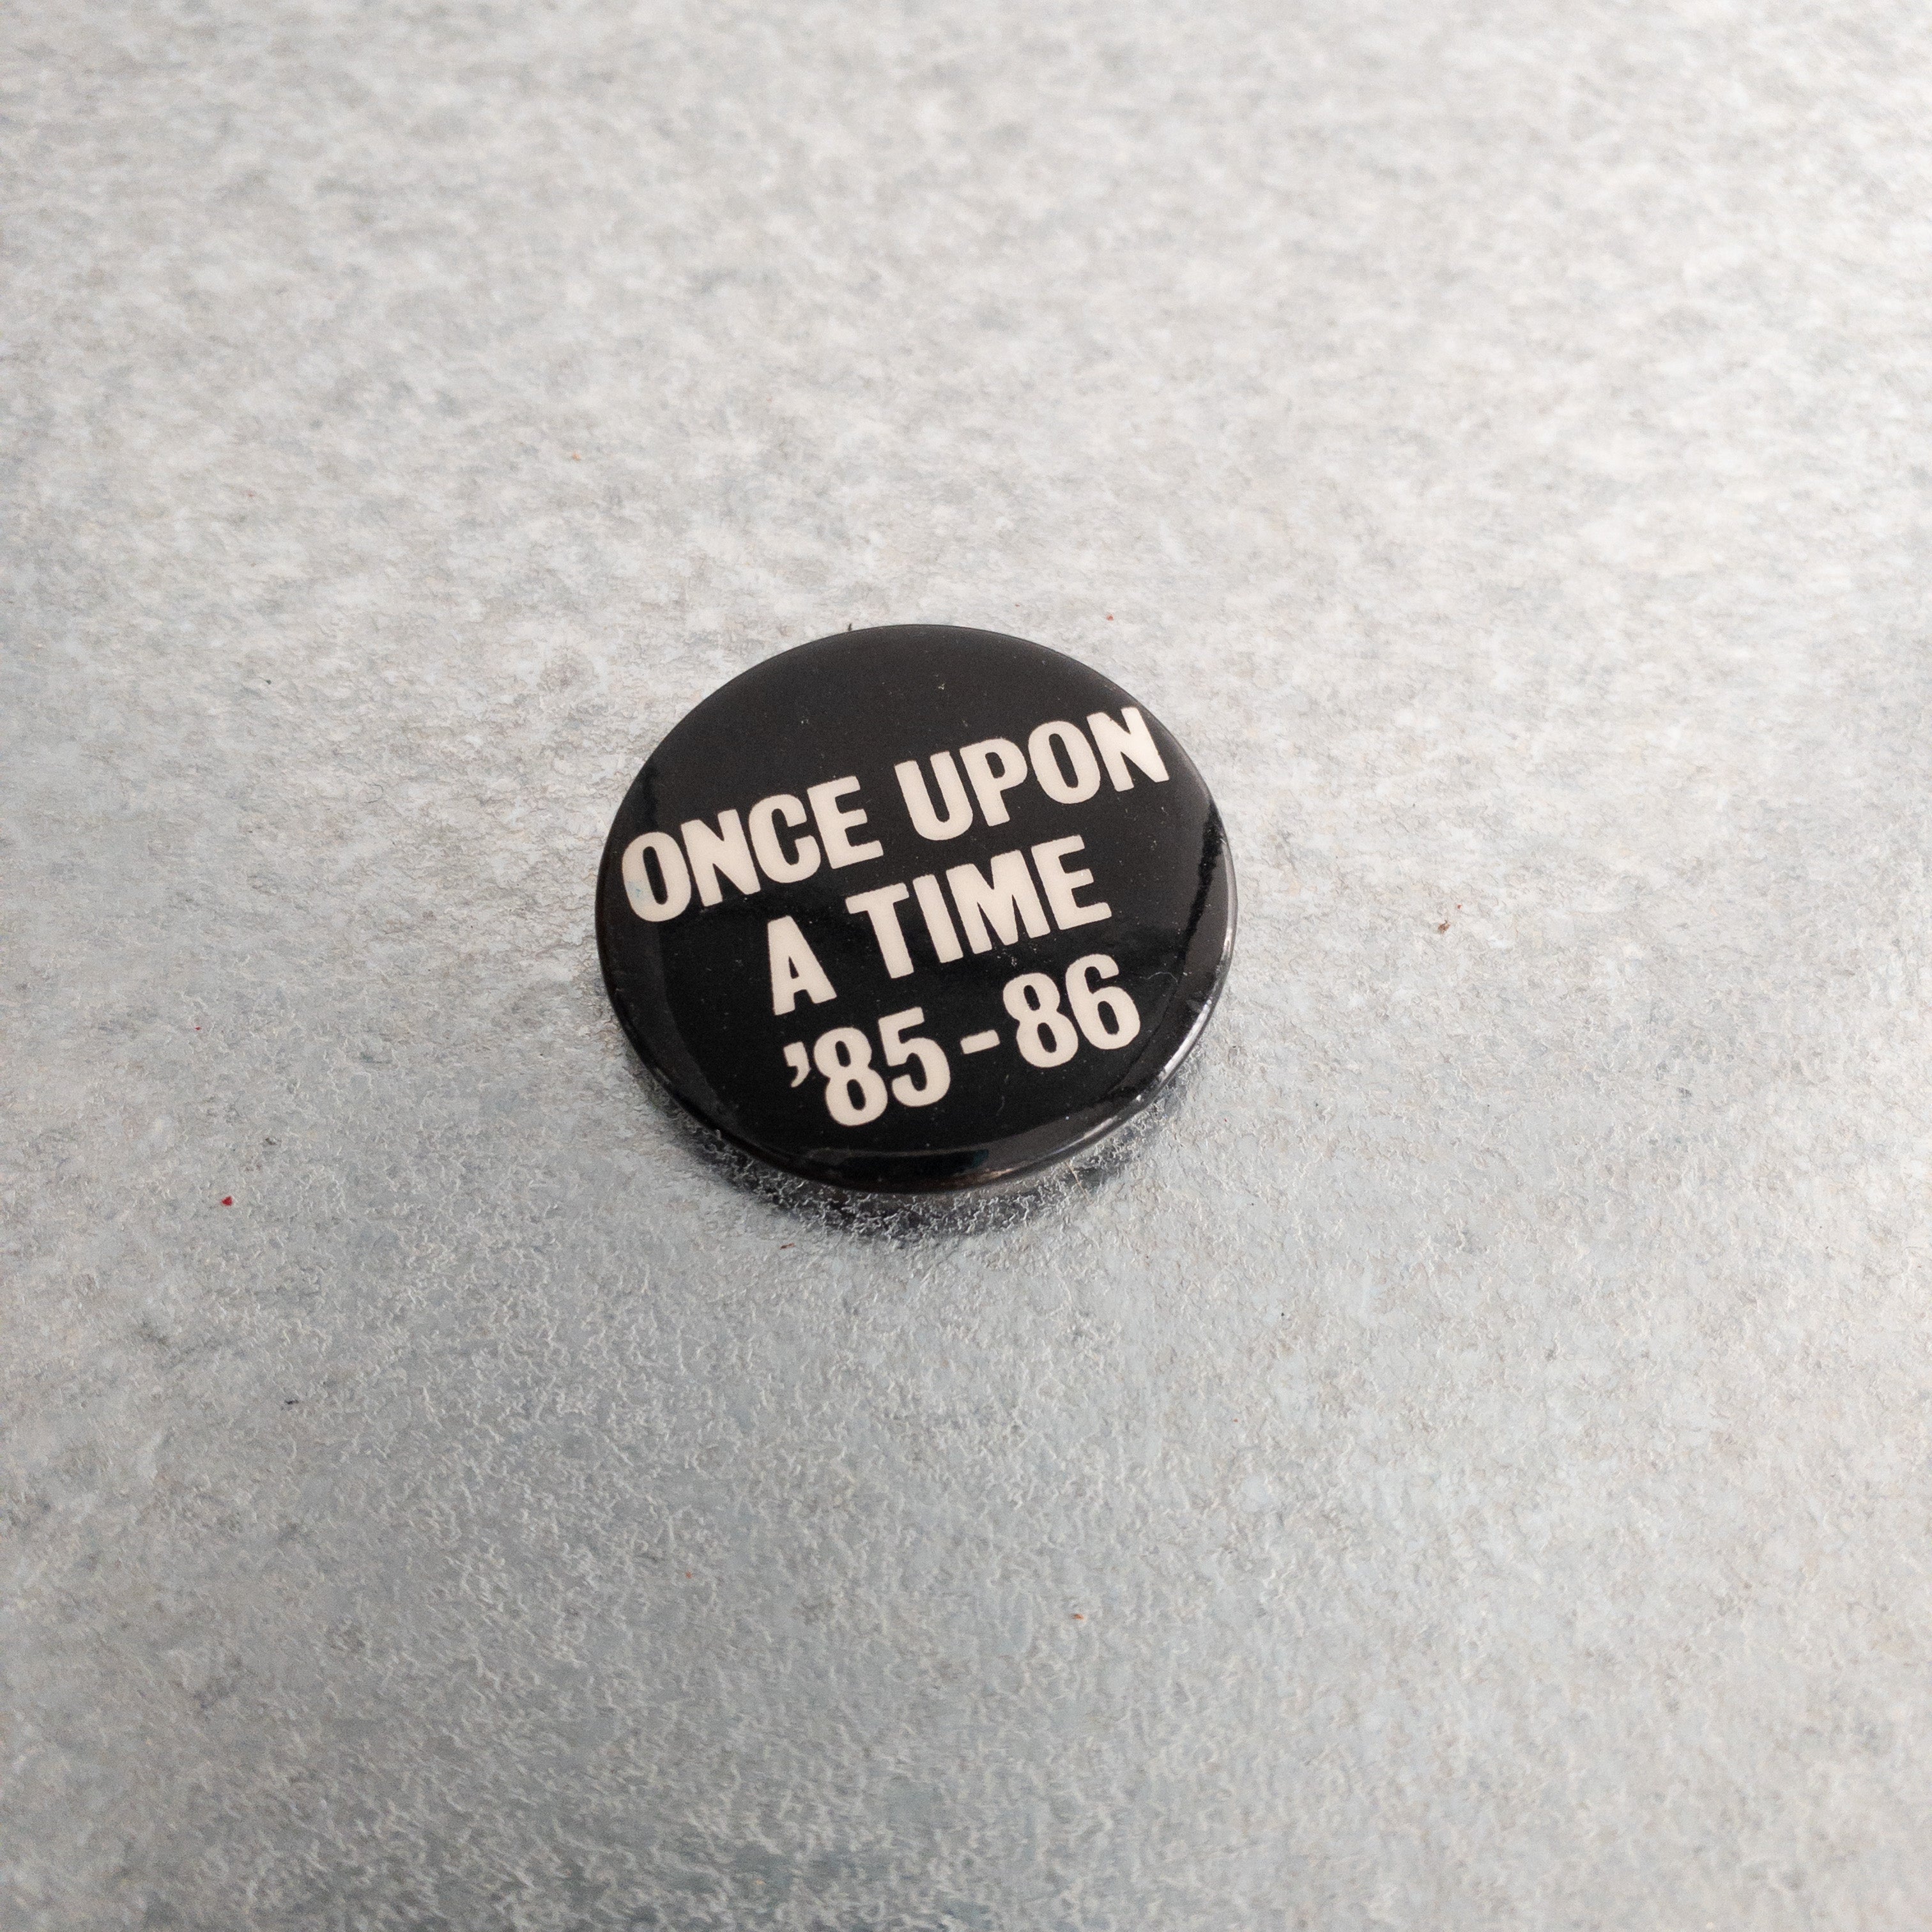 Once Upon a Time Vintage Pin